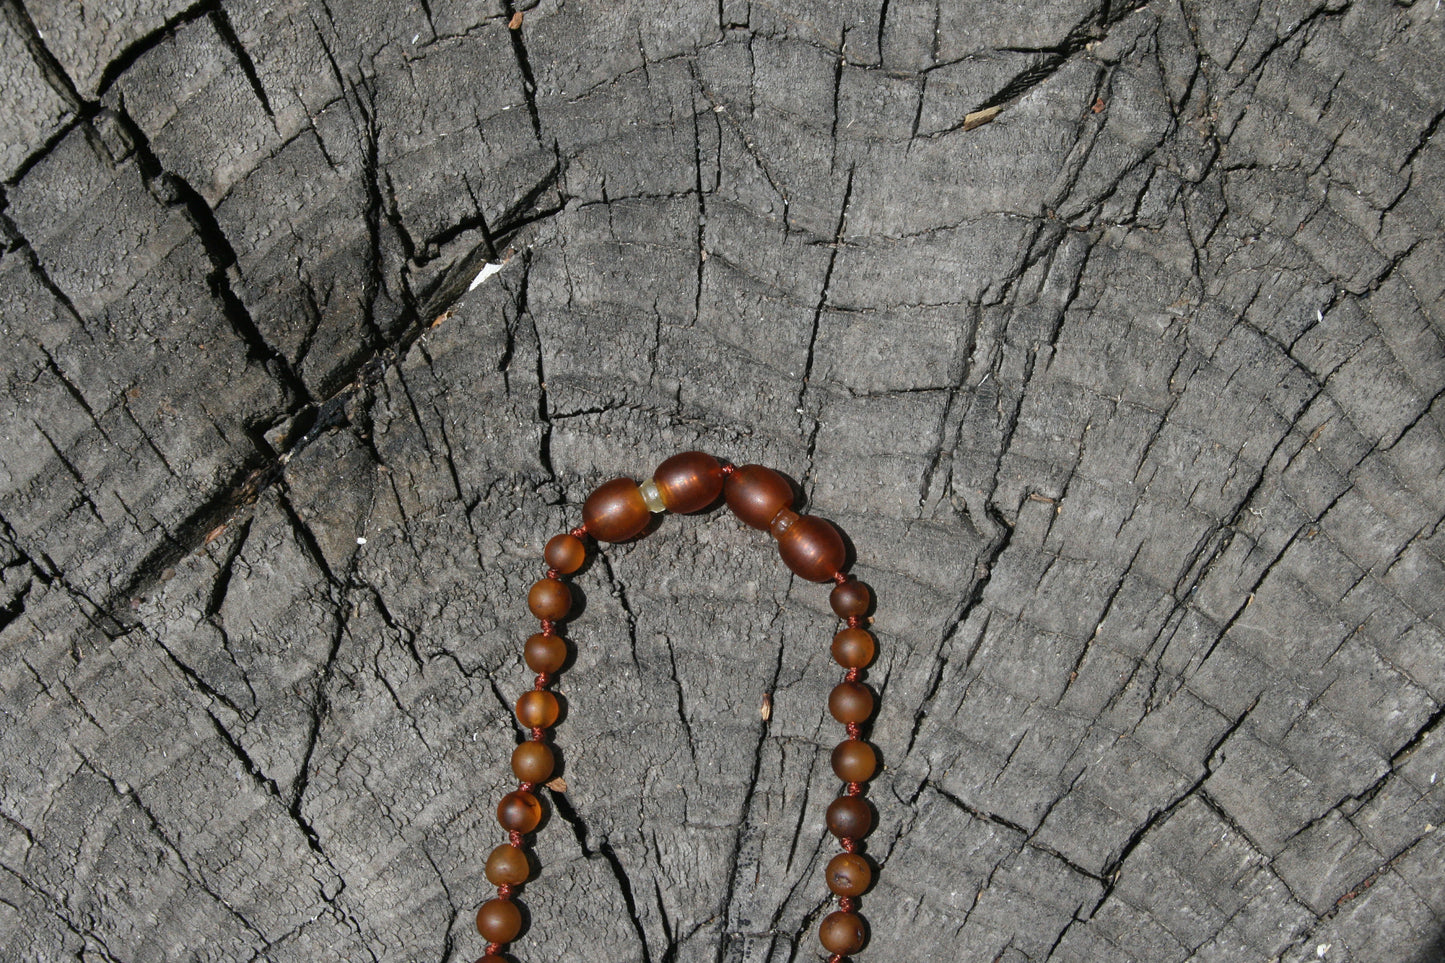 Picture 7 is a cognac extender in use. (Jewelry on a wooden background)